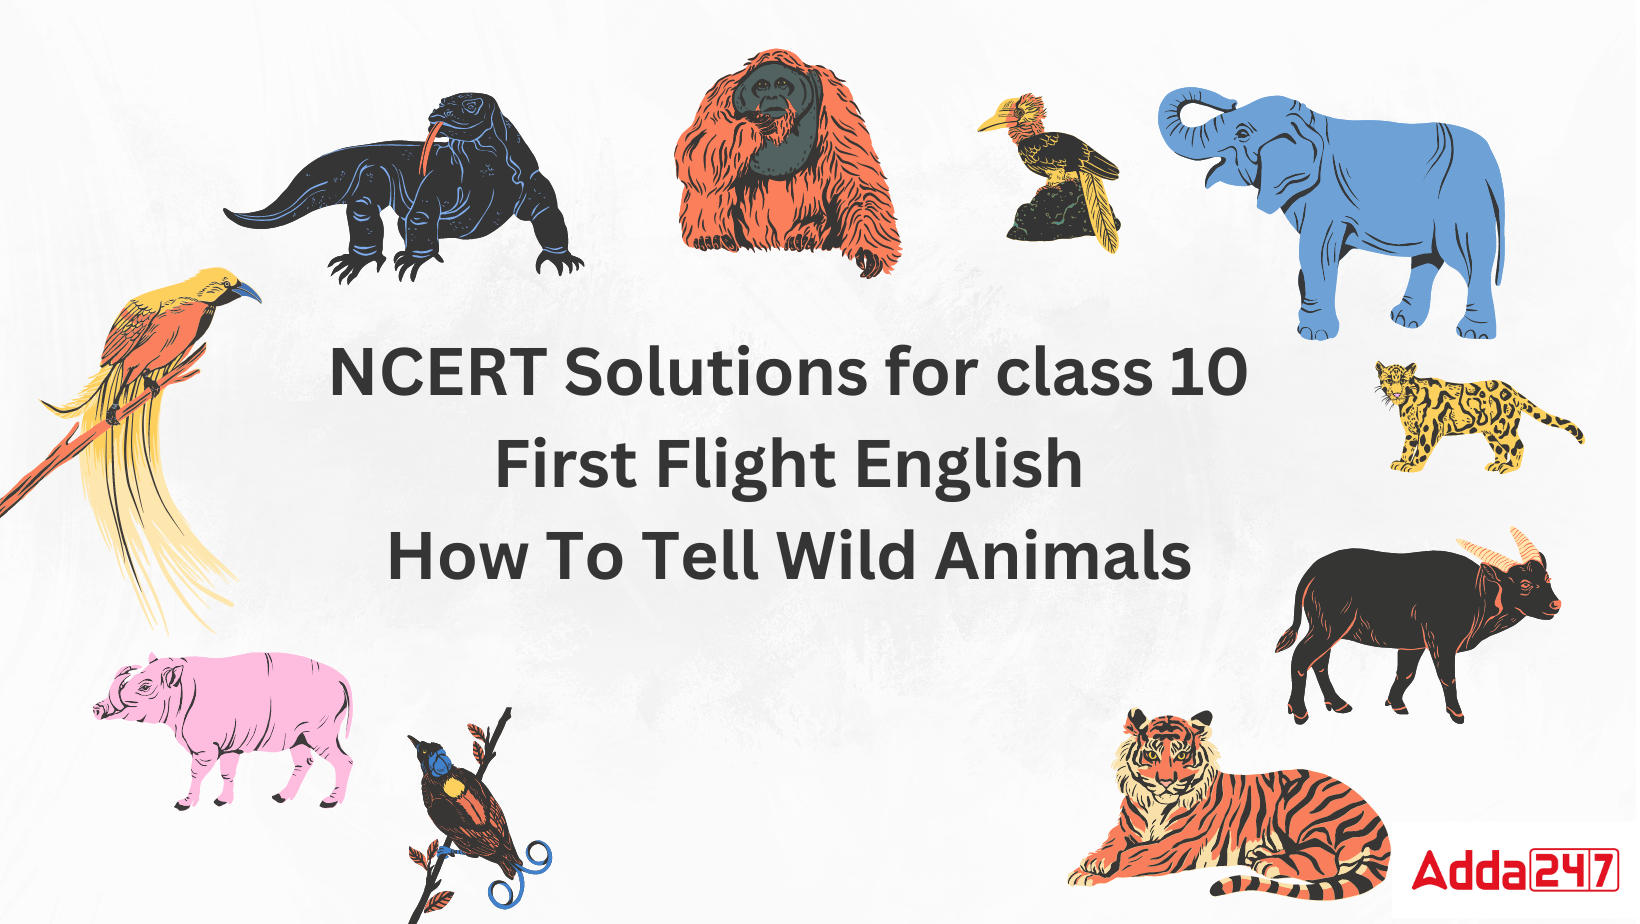 NCERT Solutions for class 10 First Flight English How To Tell Wild Animals